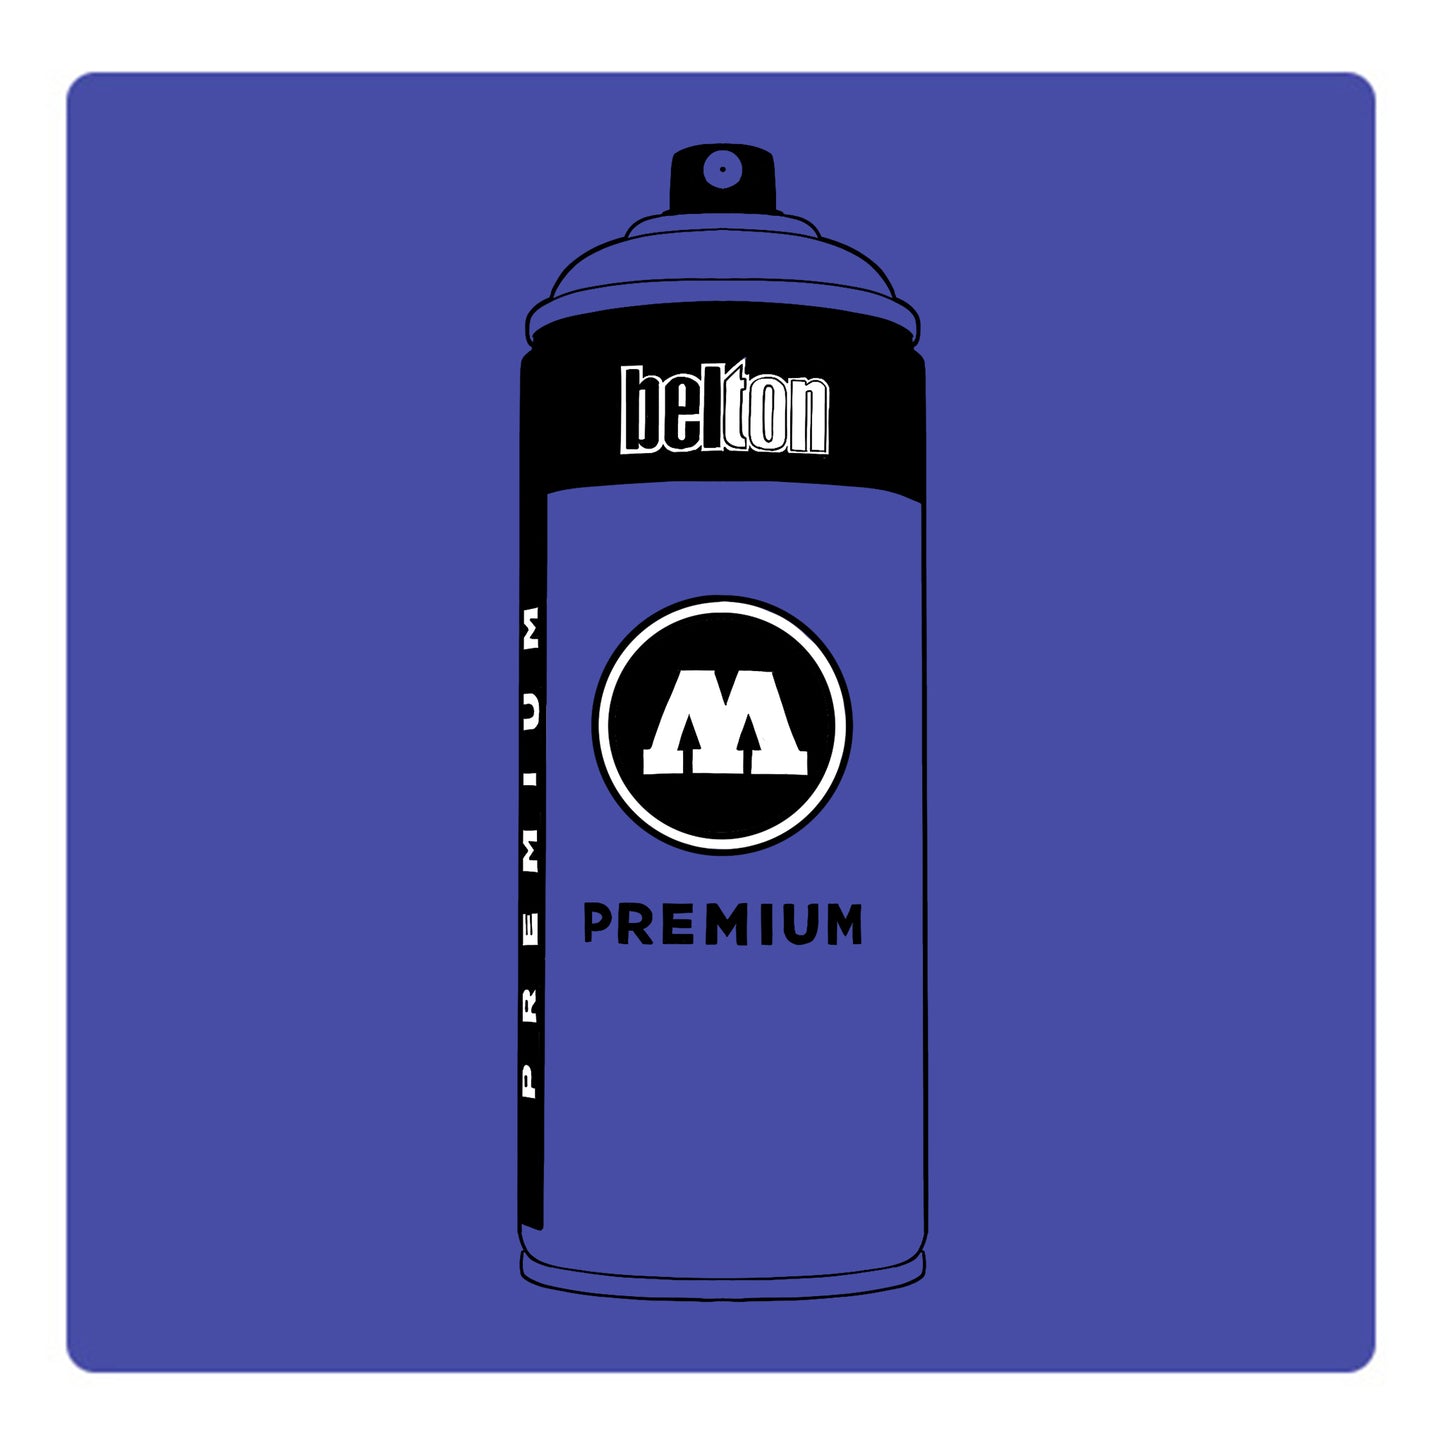 A black outline drawing of a slate blue spray paint can with the words "belton","premium" and the letter"M" written on the face in black and white font. The background is a color swatch of the same slate blue with a white border.